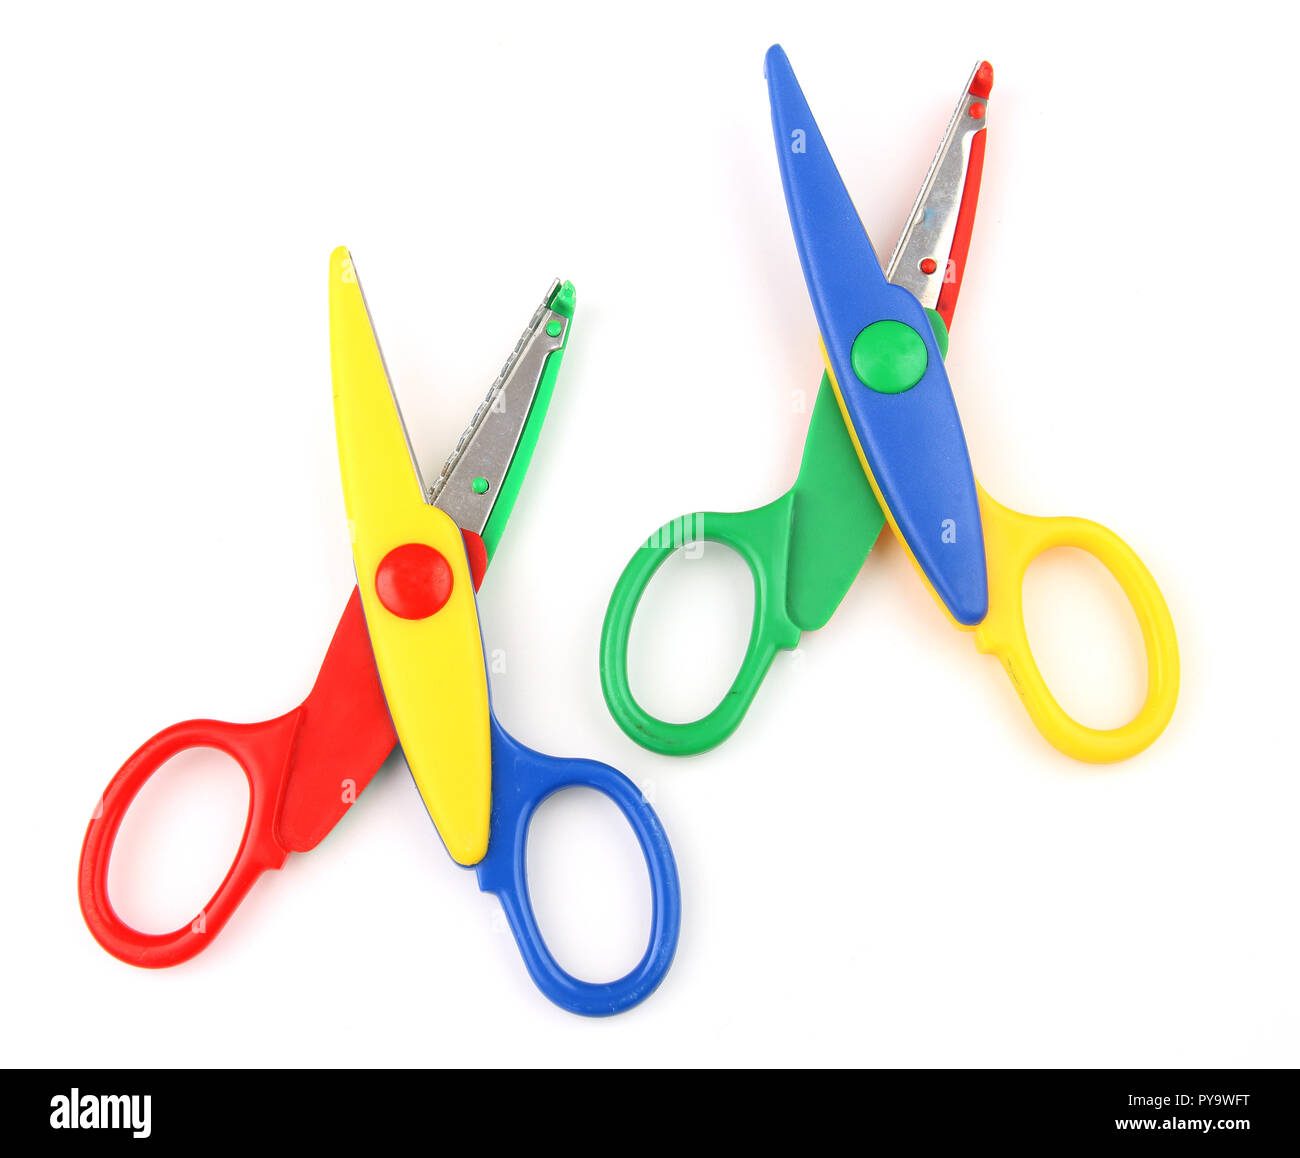 Two colorful kid's scissors isolated on white Stock Photo